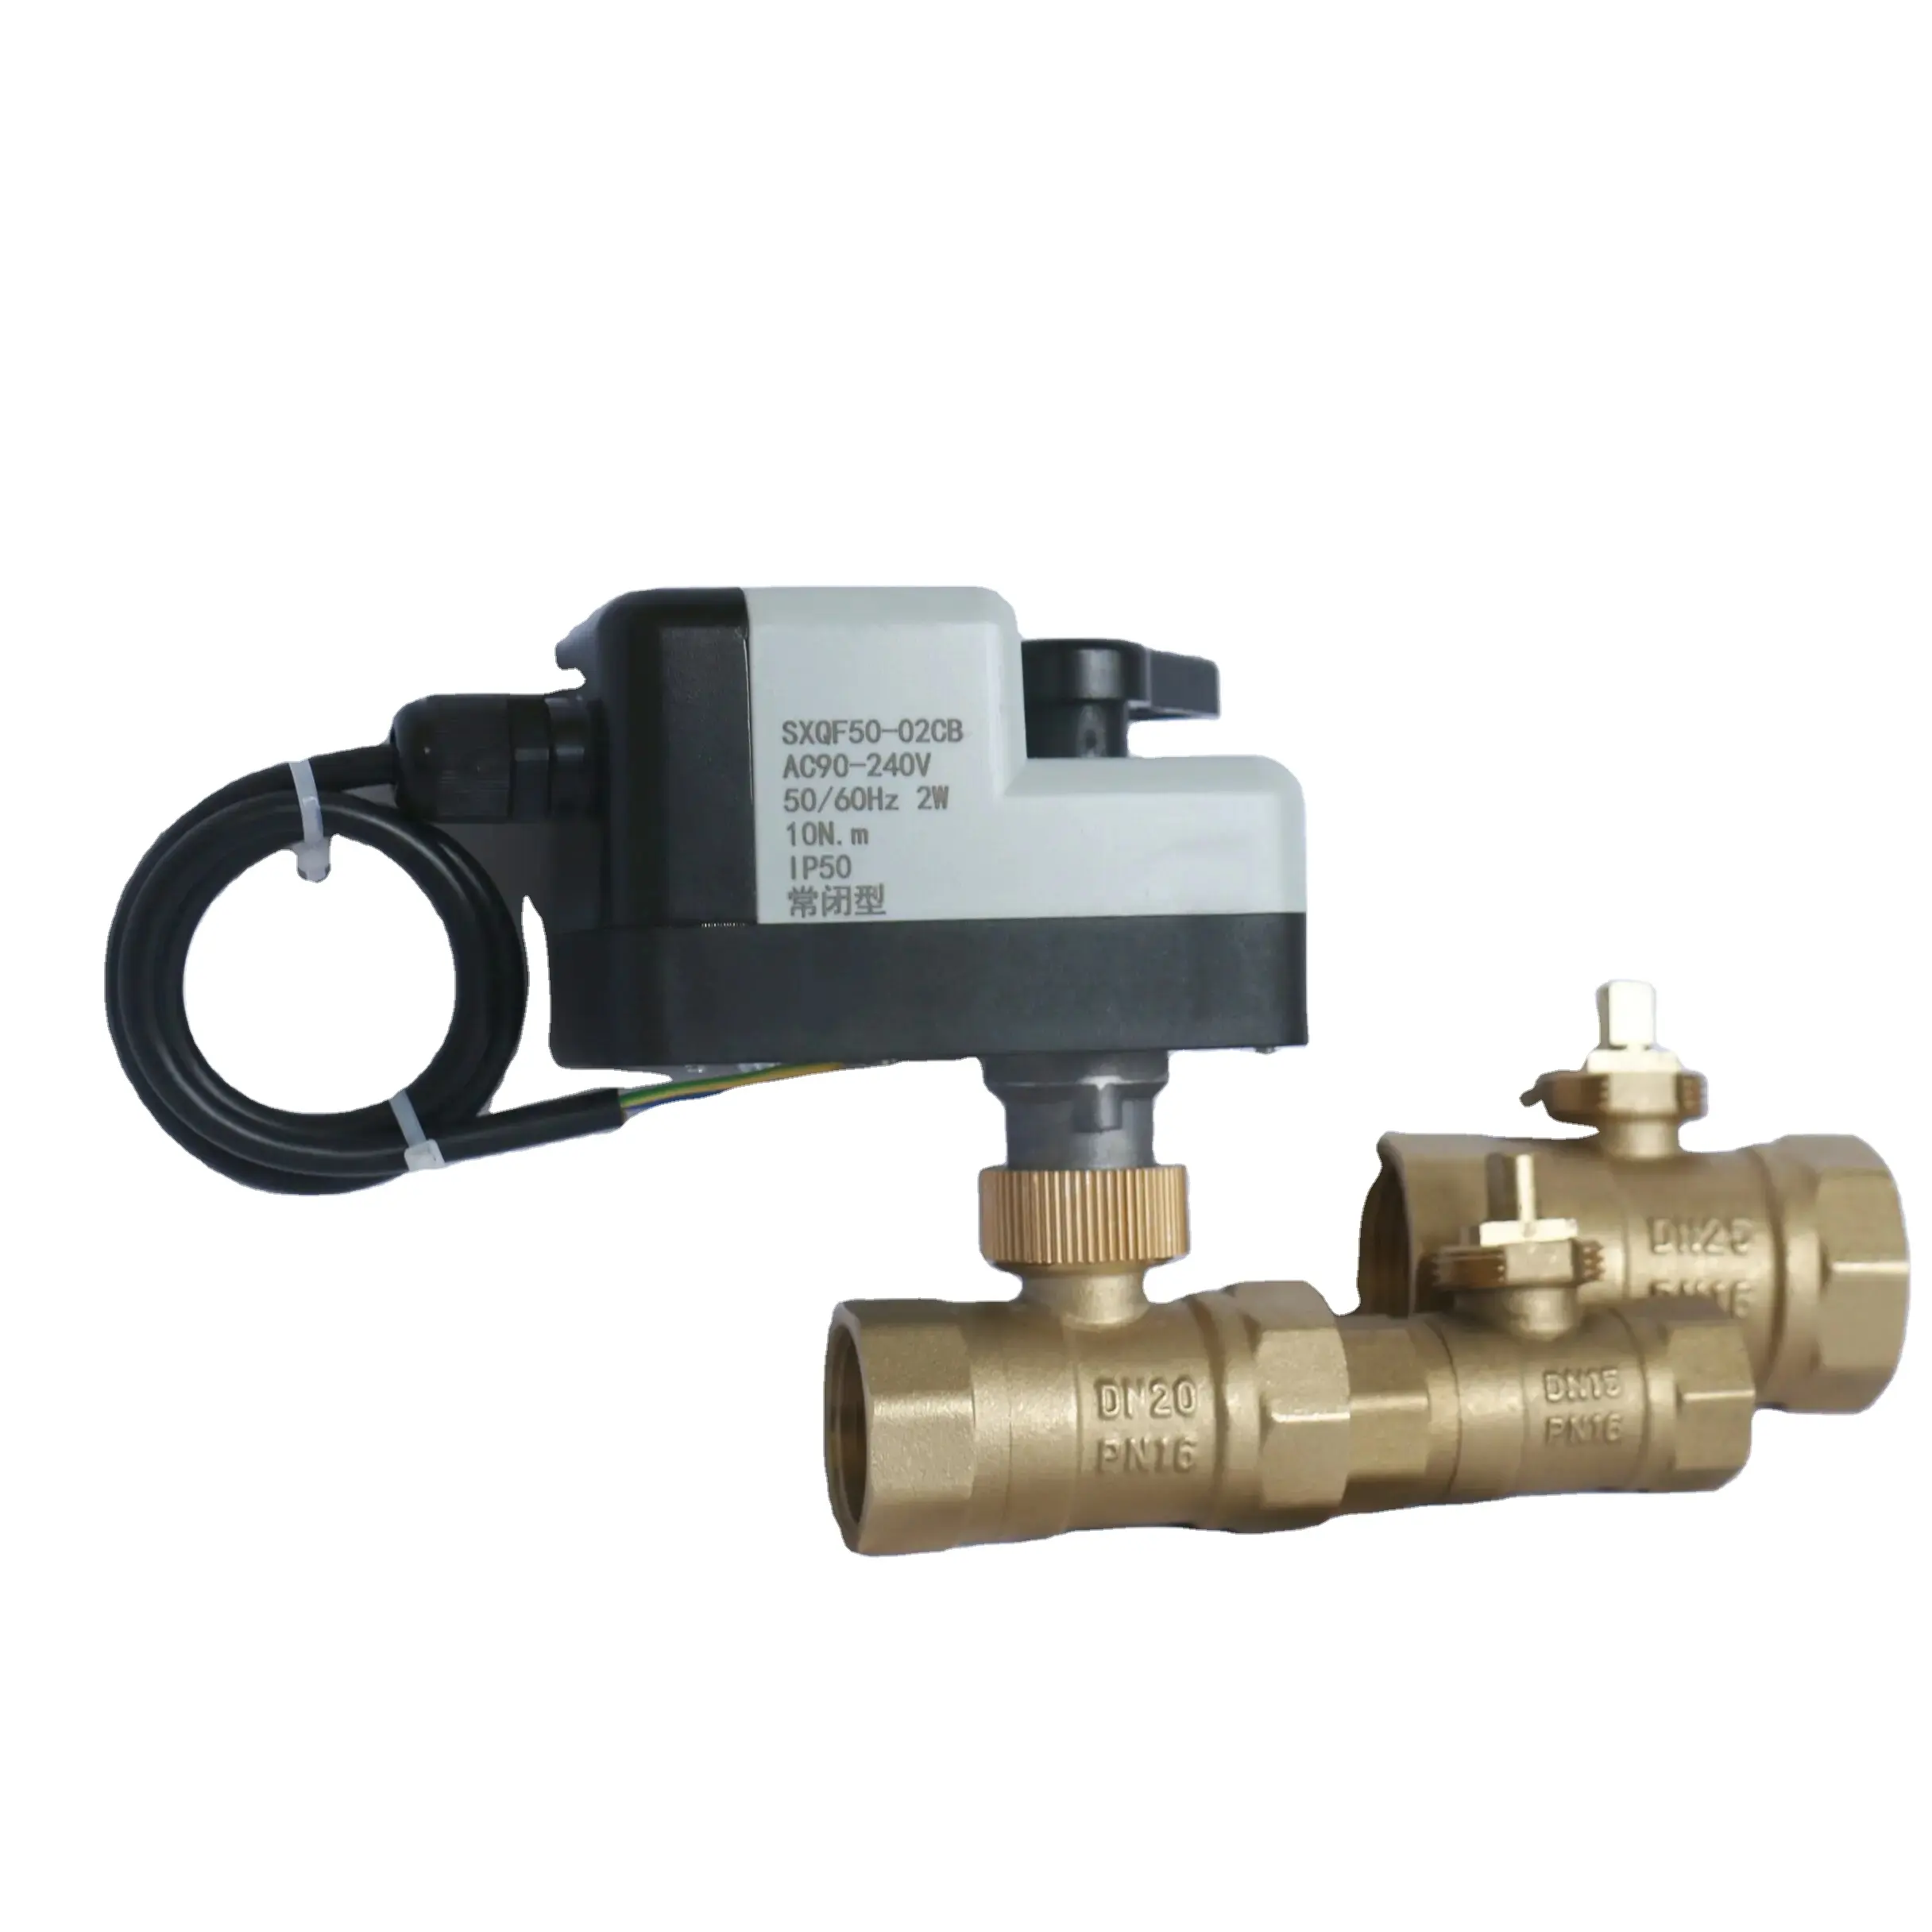 SiXi Valve 2 Way Hand Operated Integrated Ball Valve 501-AC/DC For Central Air Conditioning Systems Or Water Flow Control